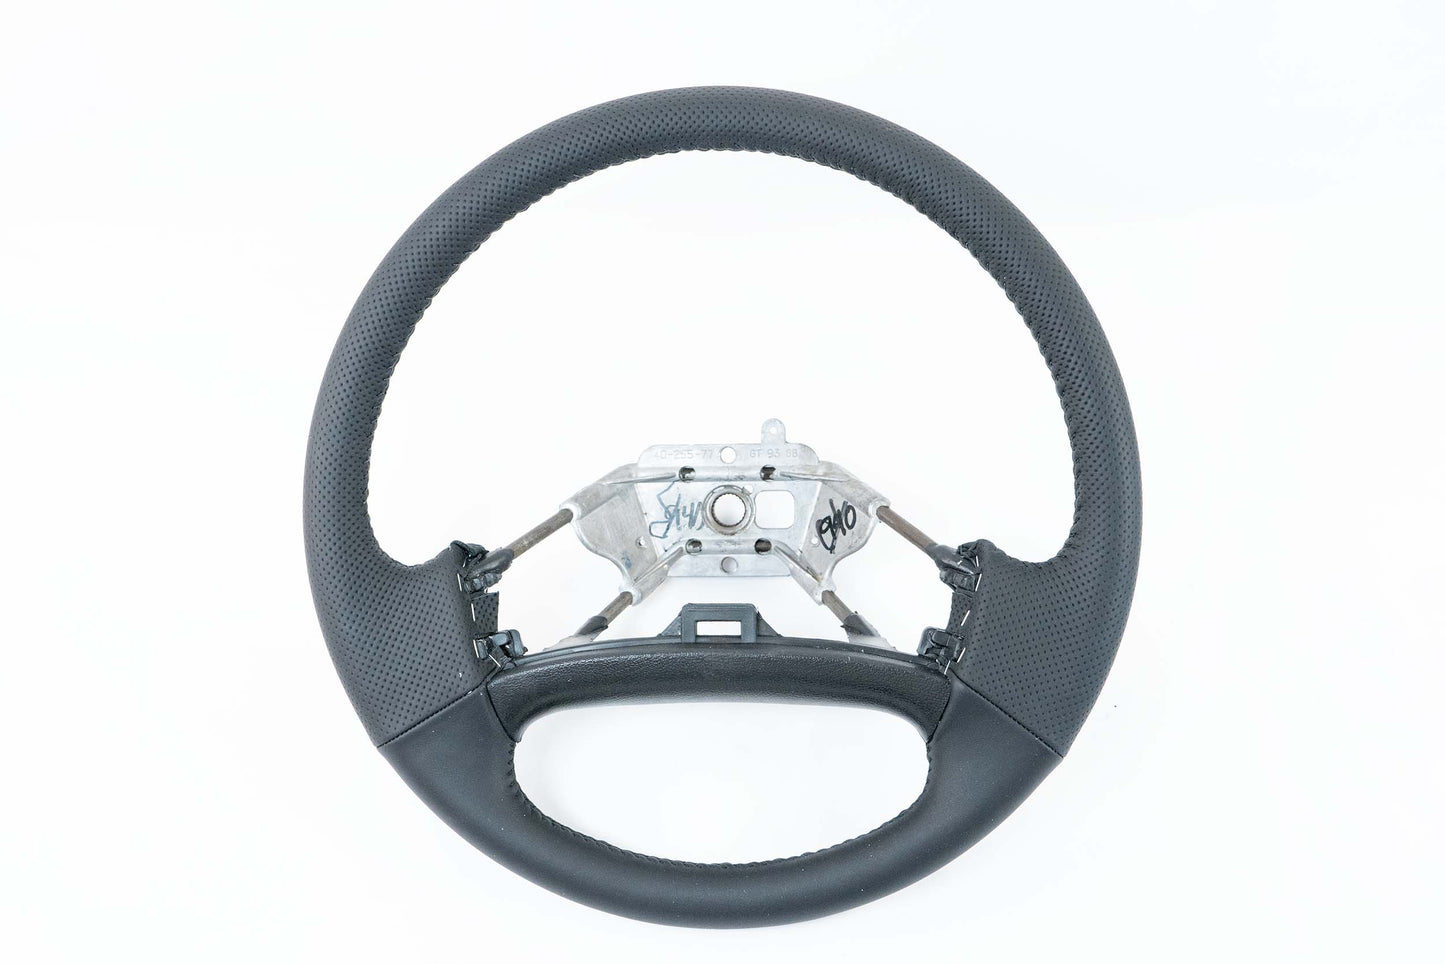 Lightning Clone Ford Steering Wheel - Recovered in USA - 2 Post